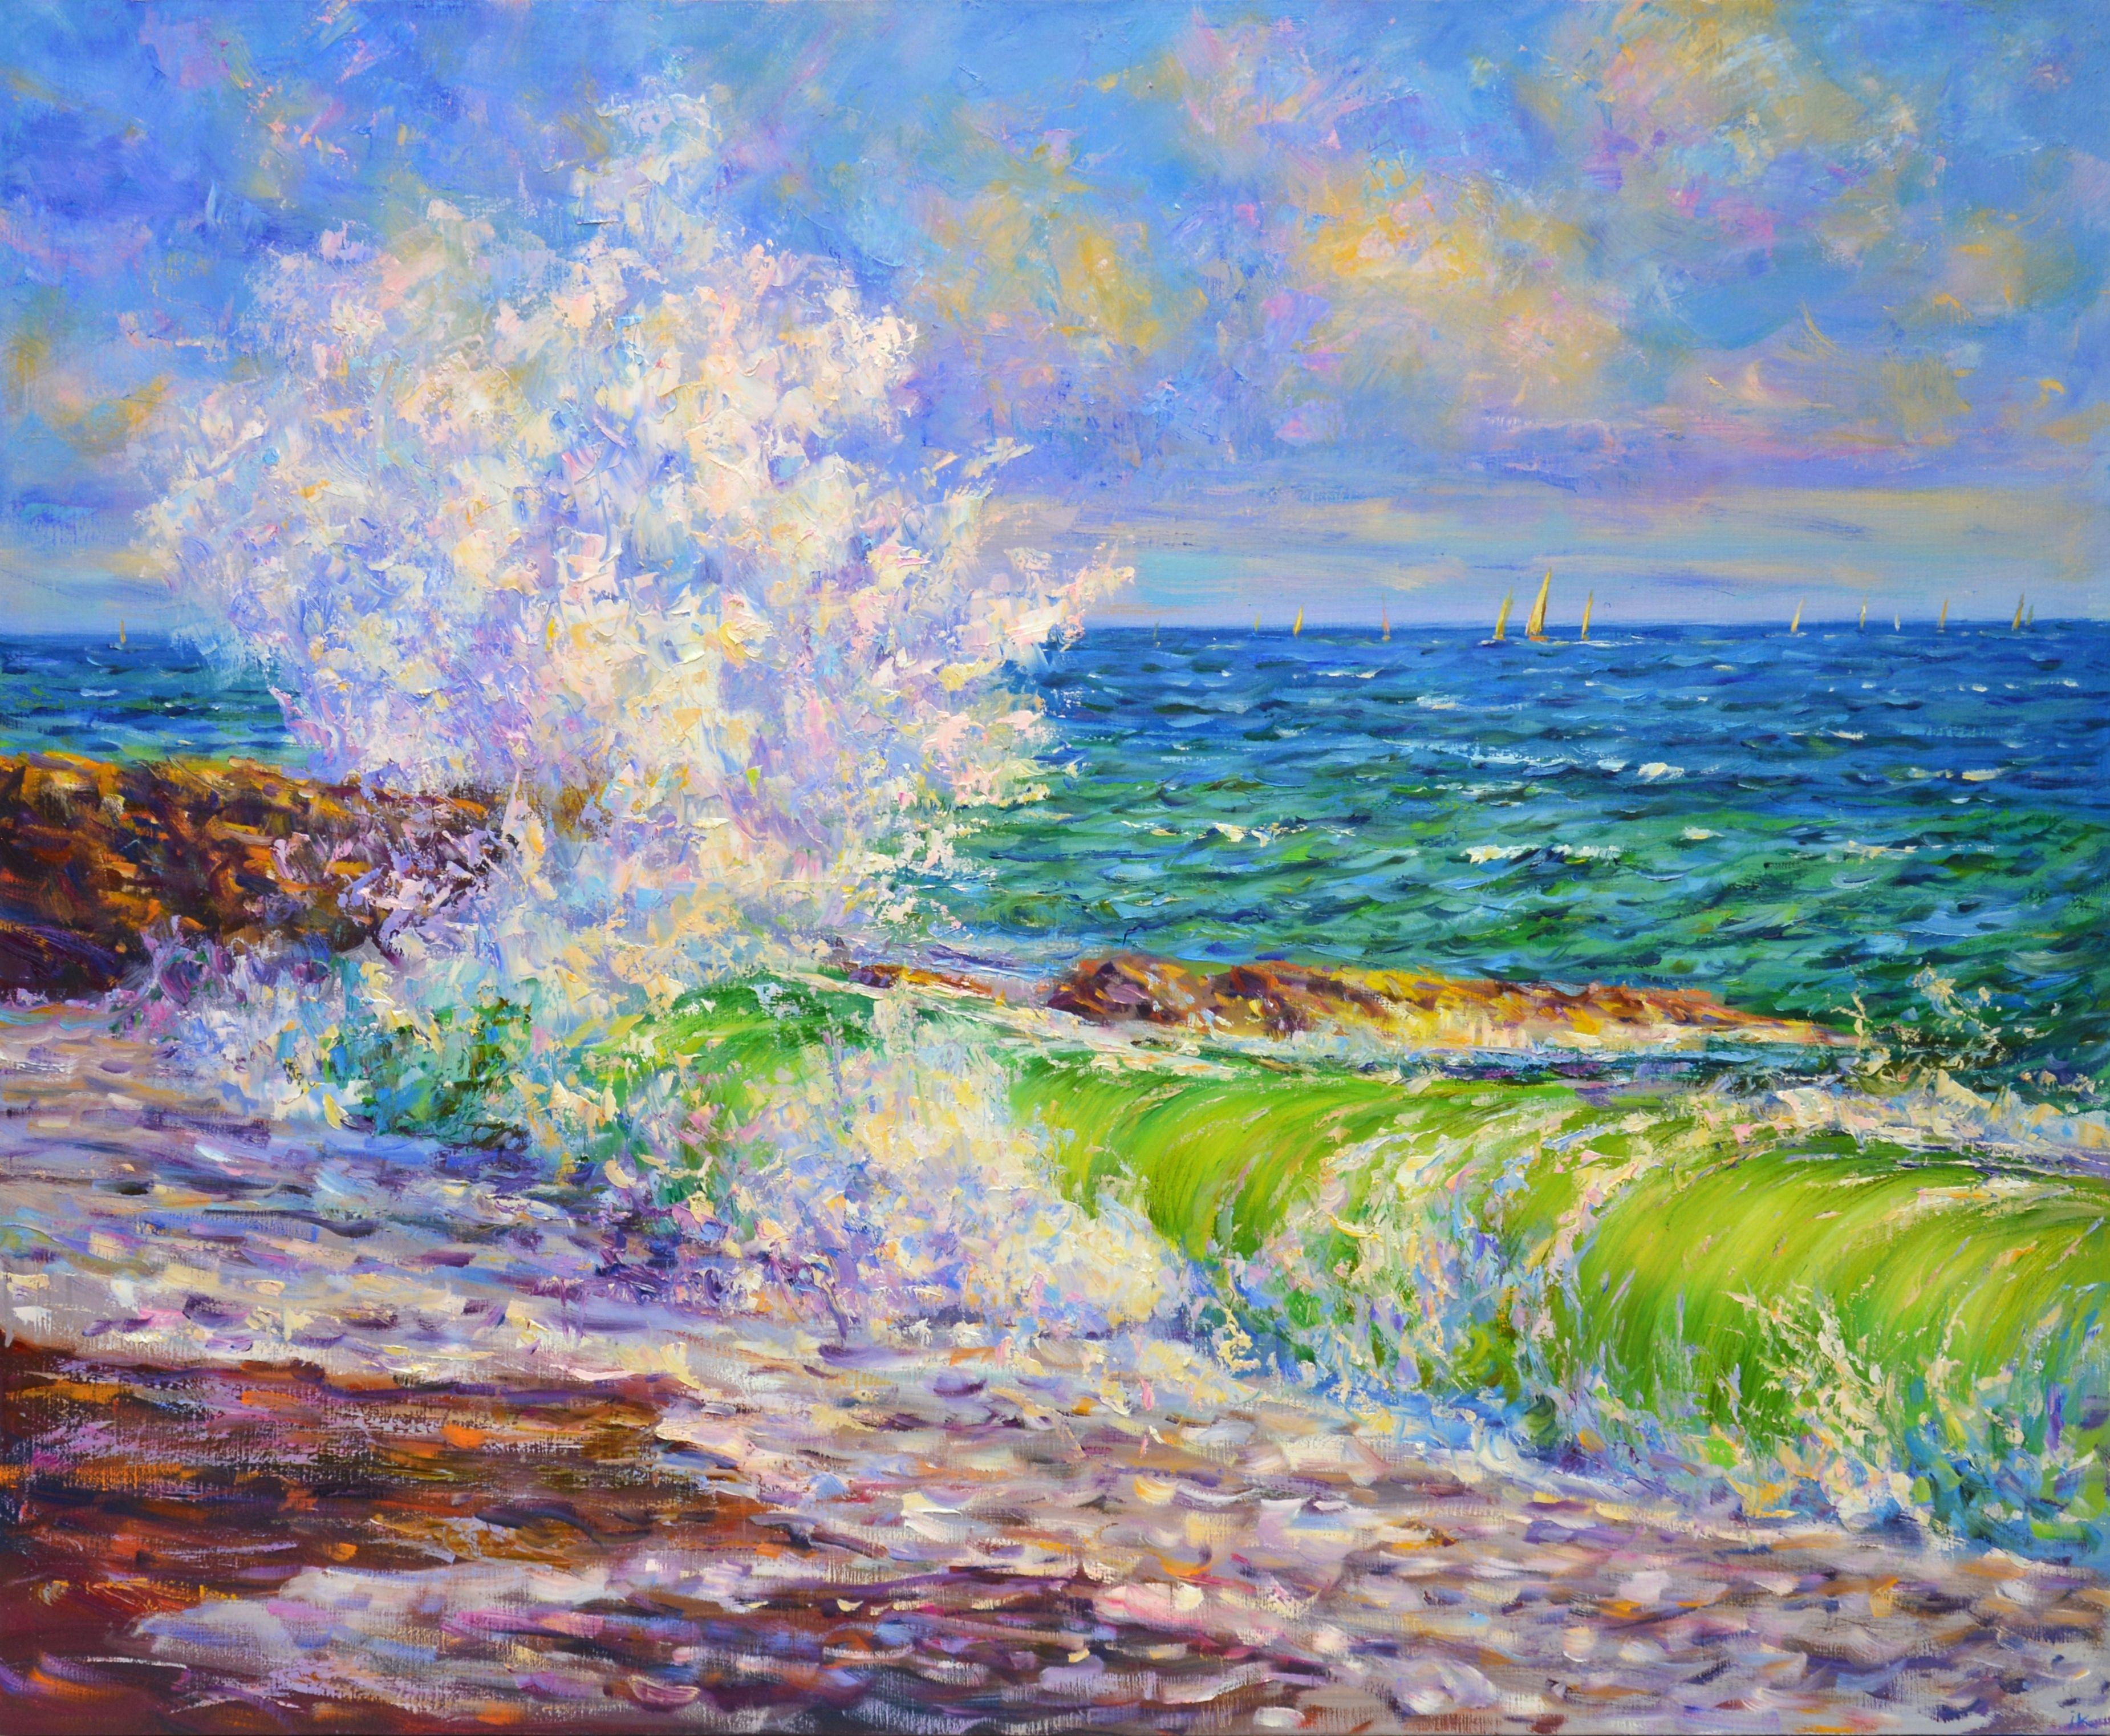 Daylight reflects off the rolling waves. A stiff palette of knives and a rich palette of blue, green, purple and red shades emphasize the energy of the sea. Sea, seascape, ocean, waves, blue, turquoise, relaxation, romance, impressionism, realism,